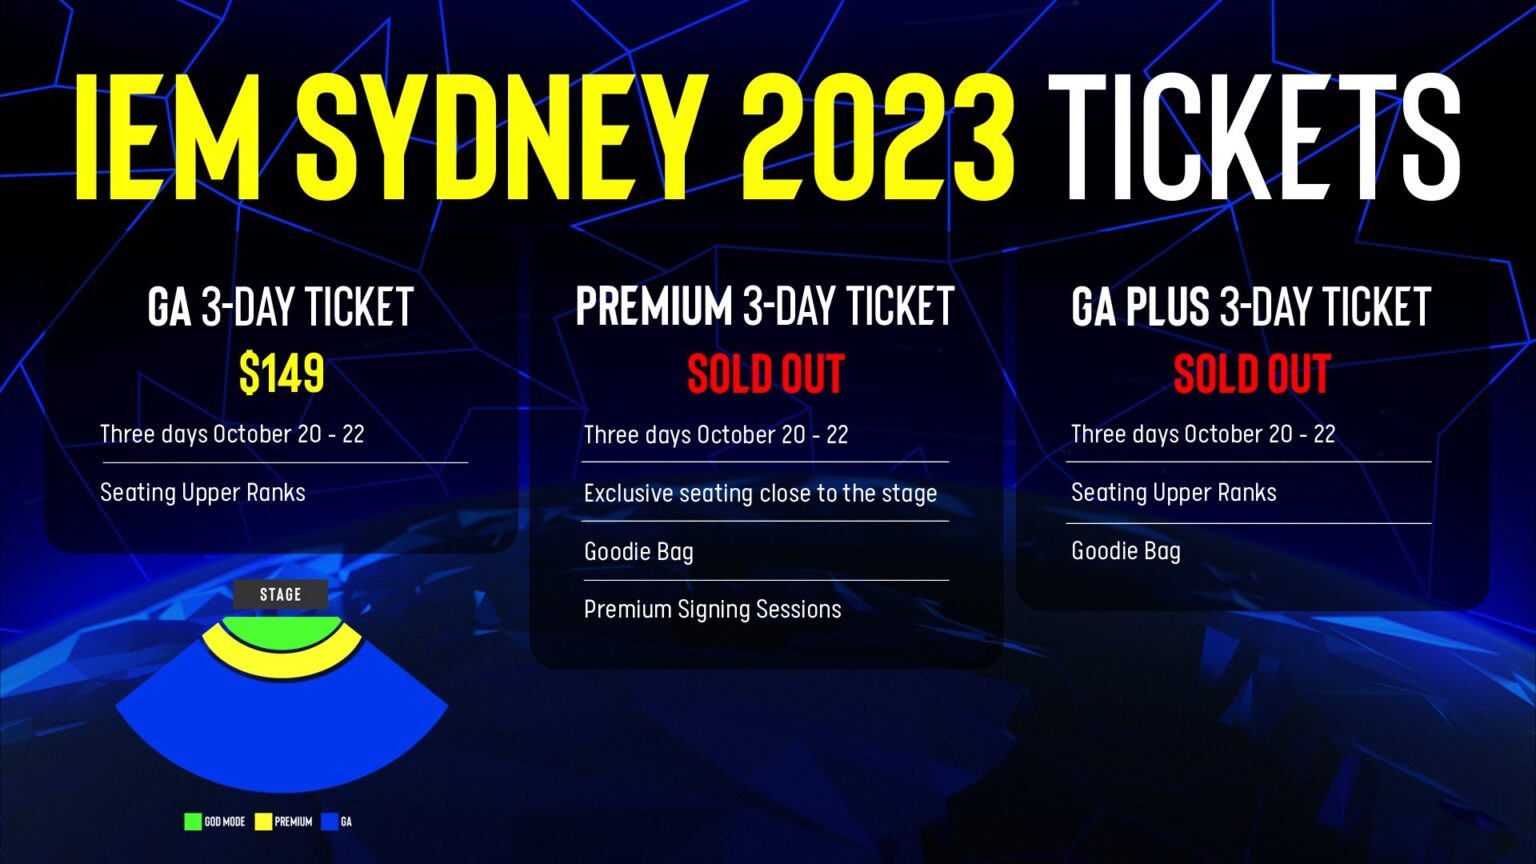 IEM is returning to the land down under after 4 years Esports Kingdom